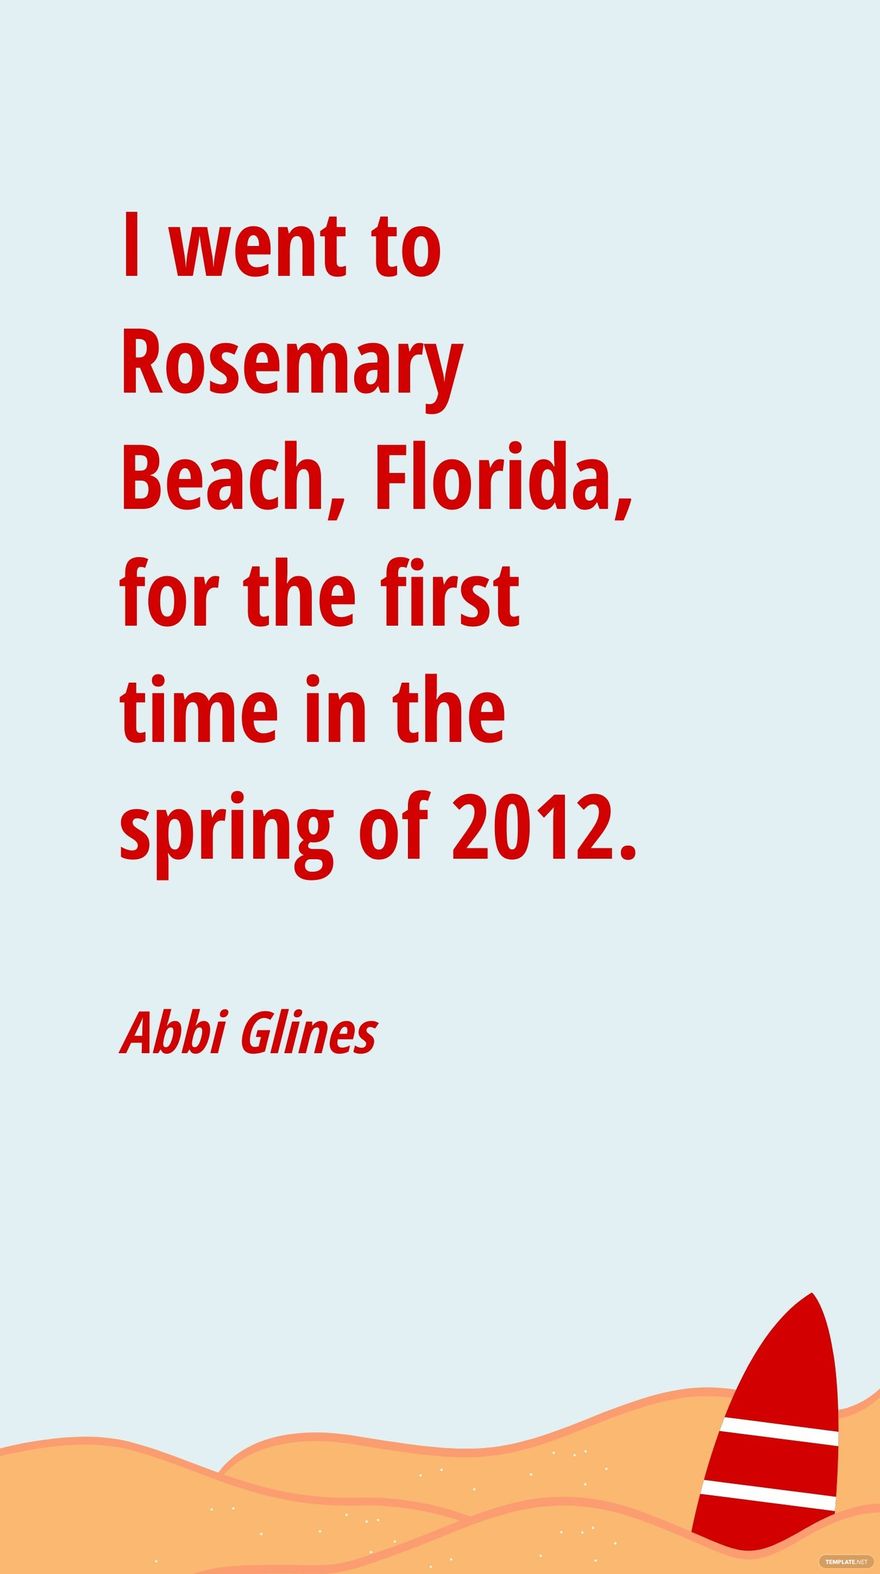 Abbi Glines - I went to Rosemary Beach, Florida, for the first time in the spring of 2012.